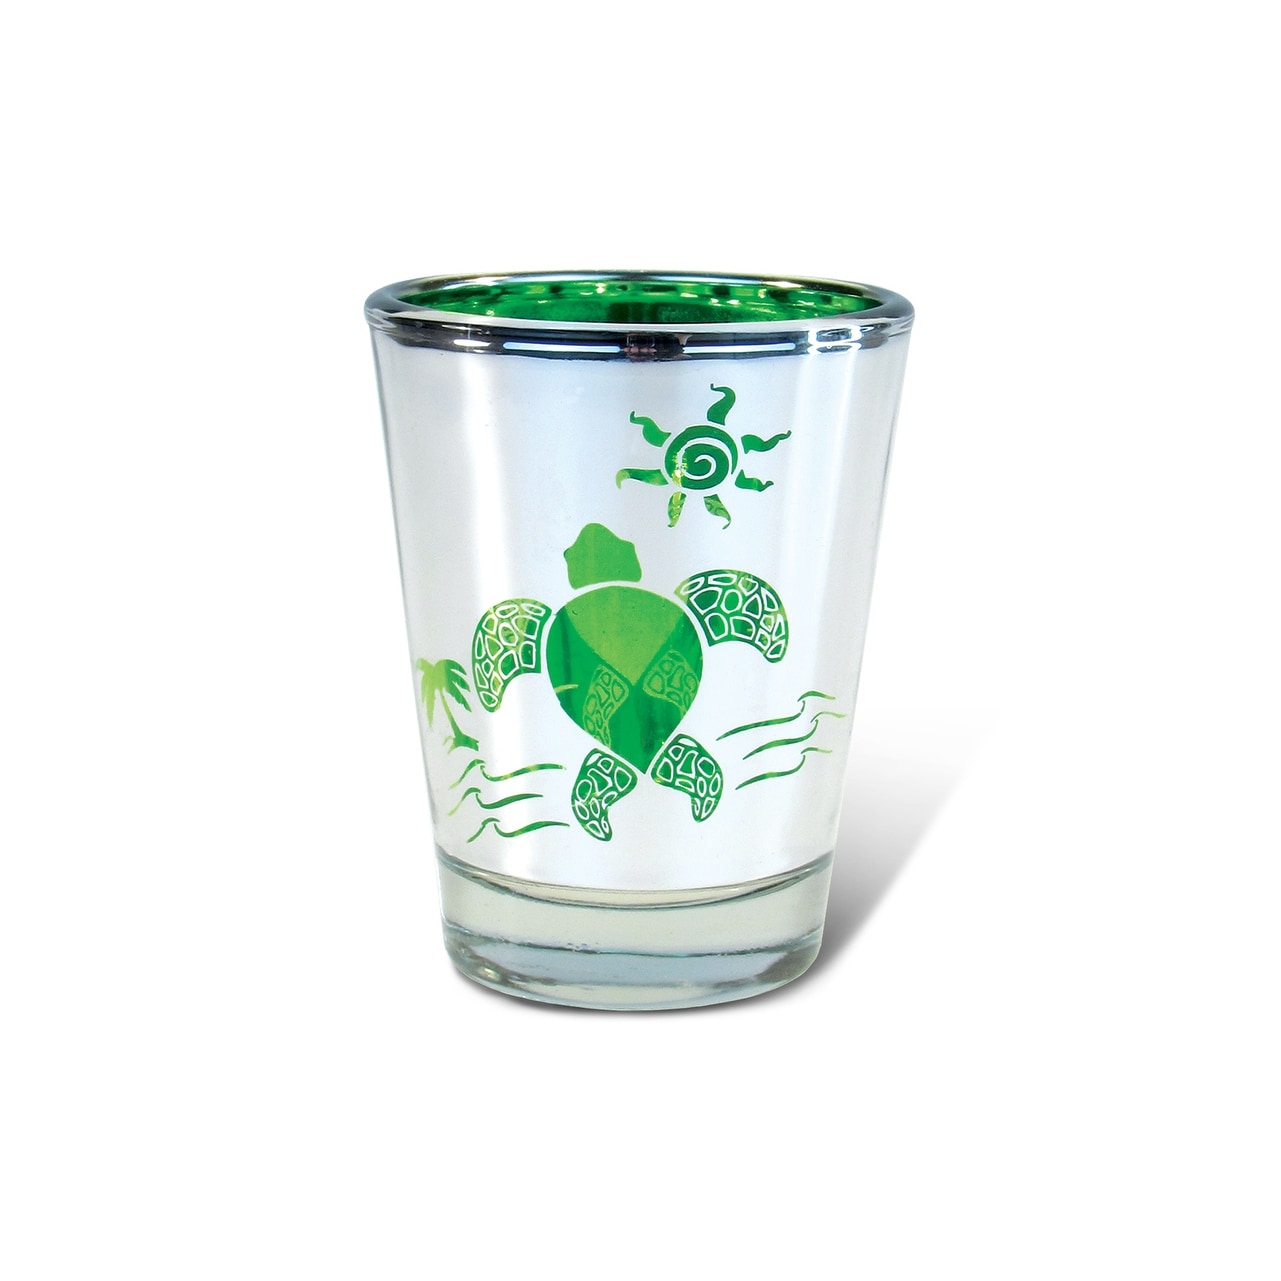 https://ak1.ostkcdn.com/images/products/is/images/direct/a8d44ac0f96e61334313c28fbb1d404e5edbb499/Puzzled-1.7-Oz-Green-Turtle-Shot-Glass%2C-2.5-Inch-Novelty-Glassware.jpg